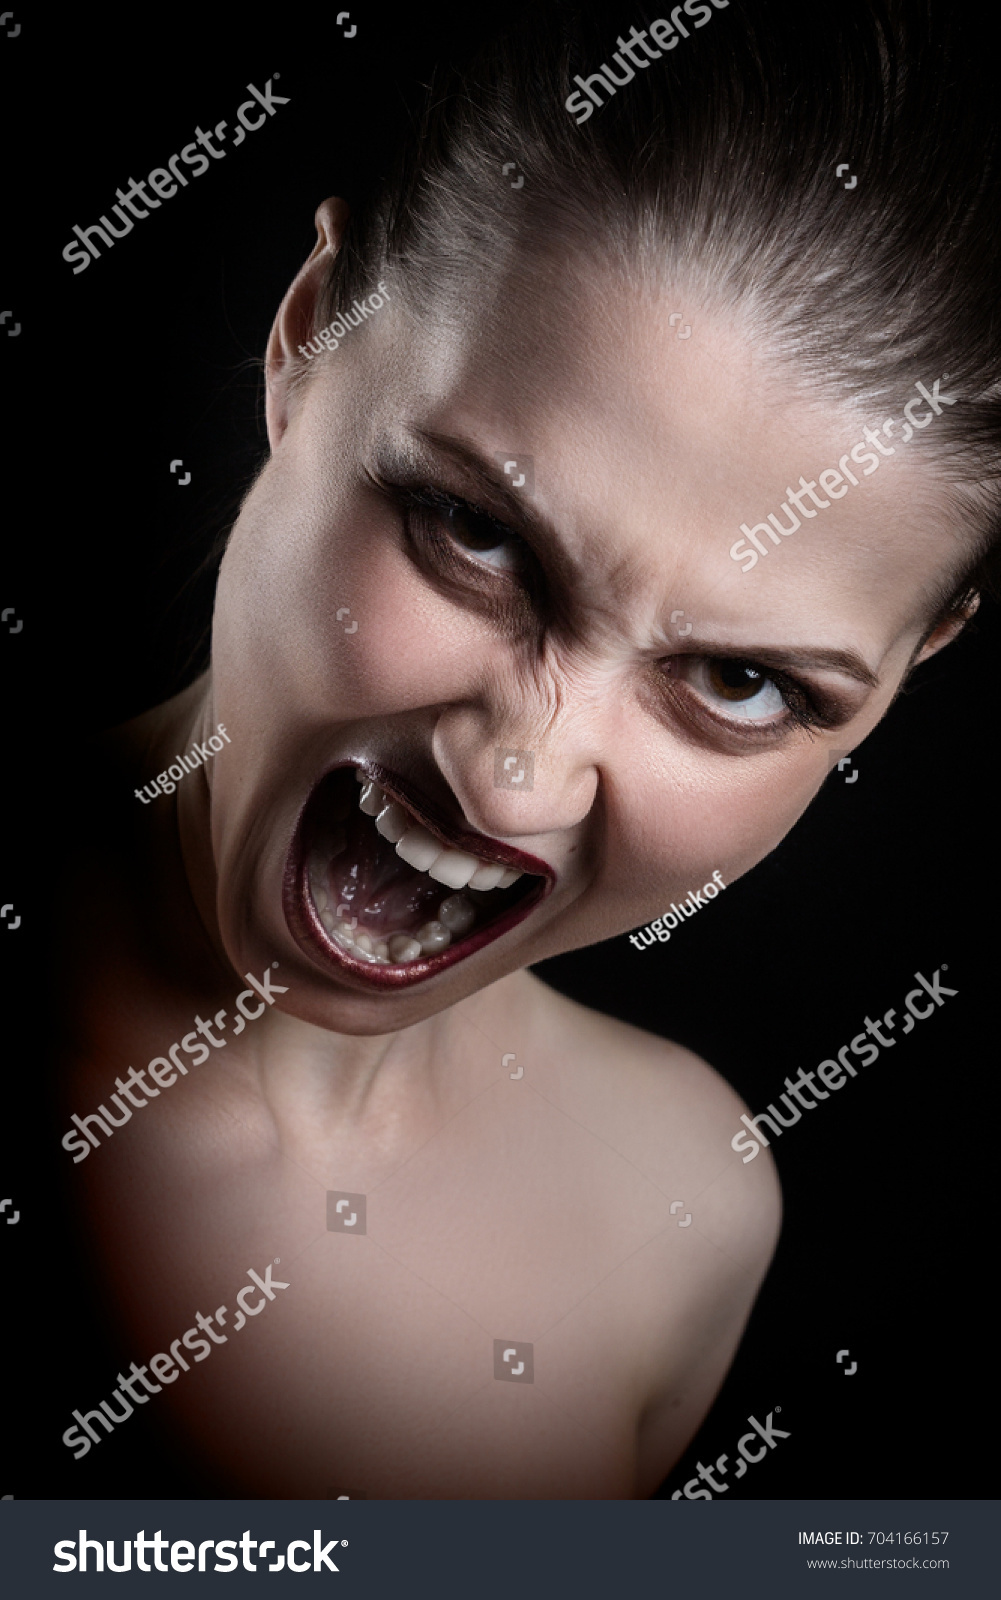 Angry Nude Girl Screaming Camera On Stock Photo 704166157 Shutterstock